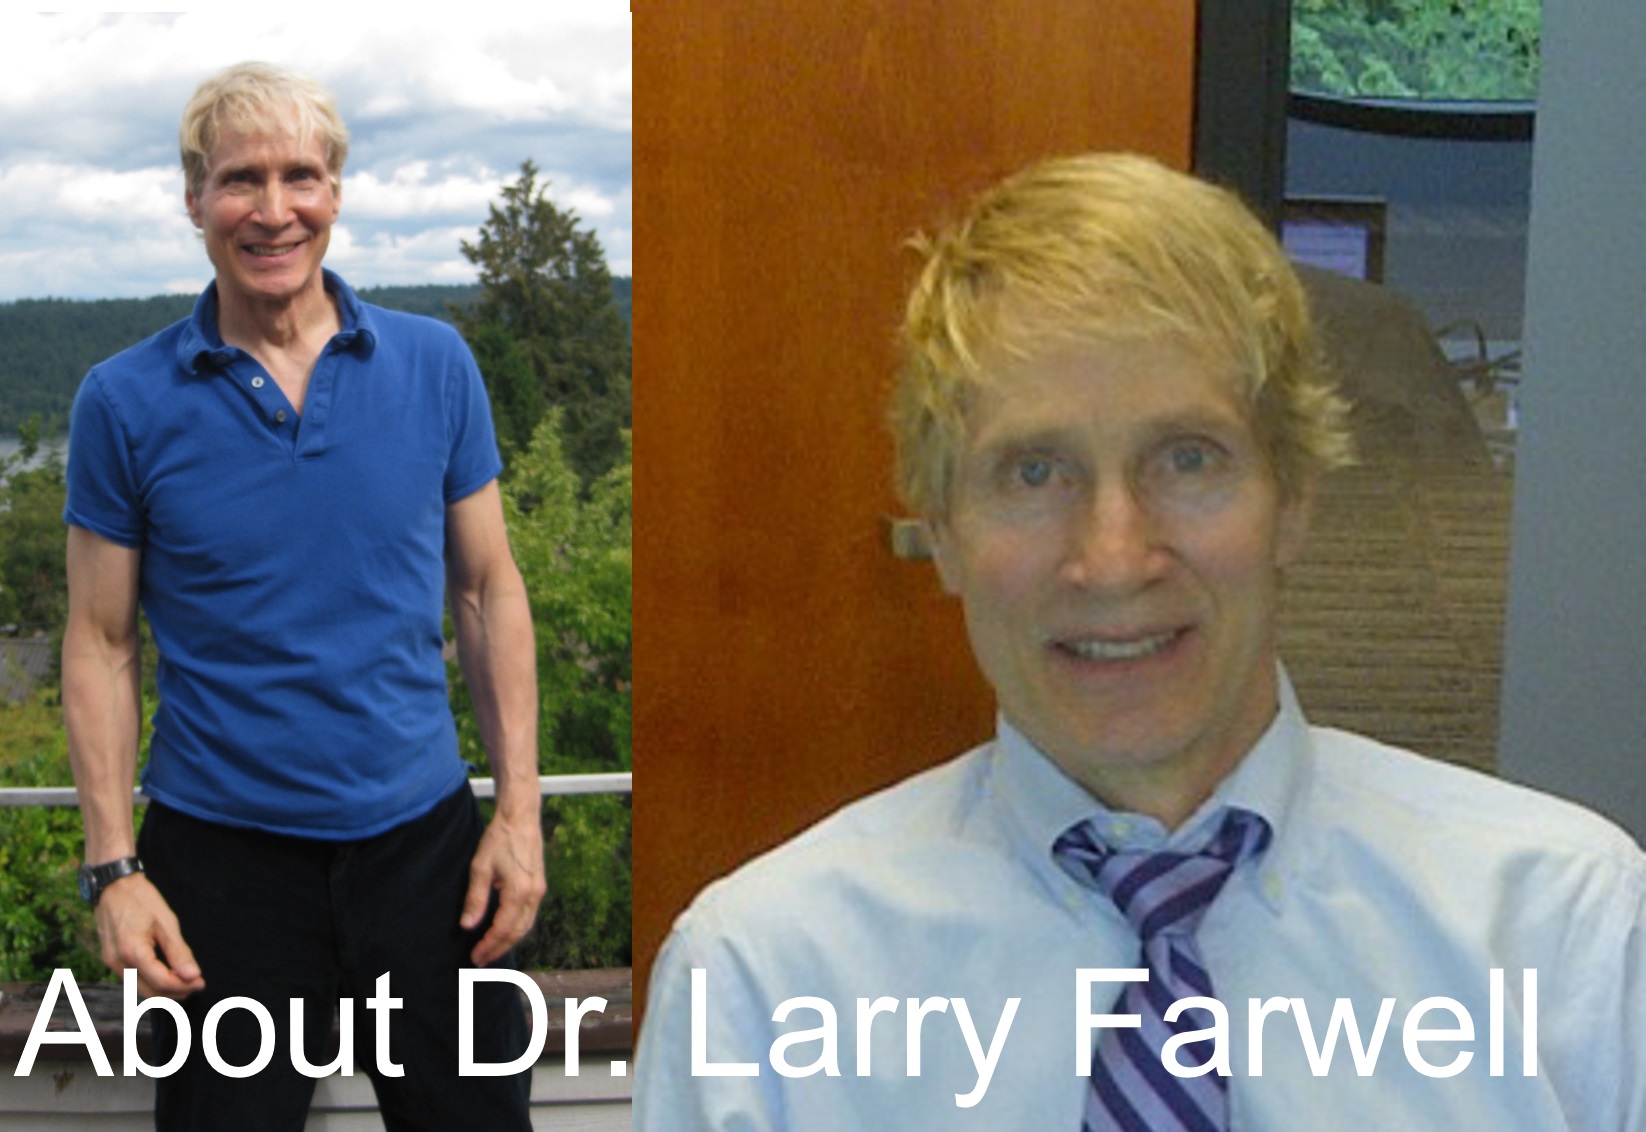 About Dr. Farwell Pic Plus Label